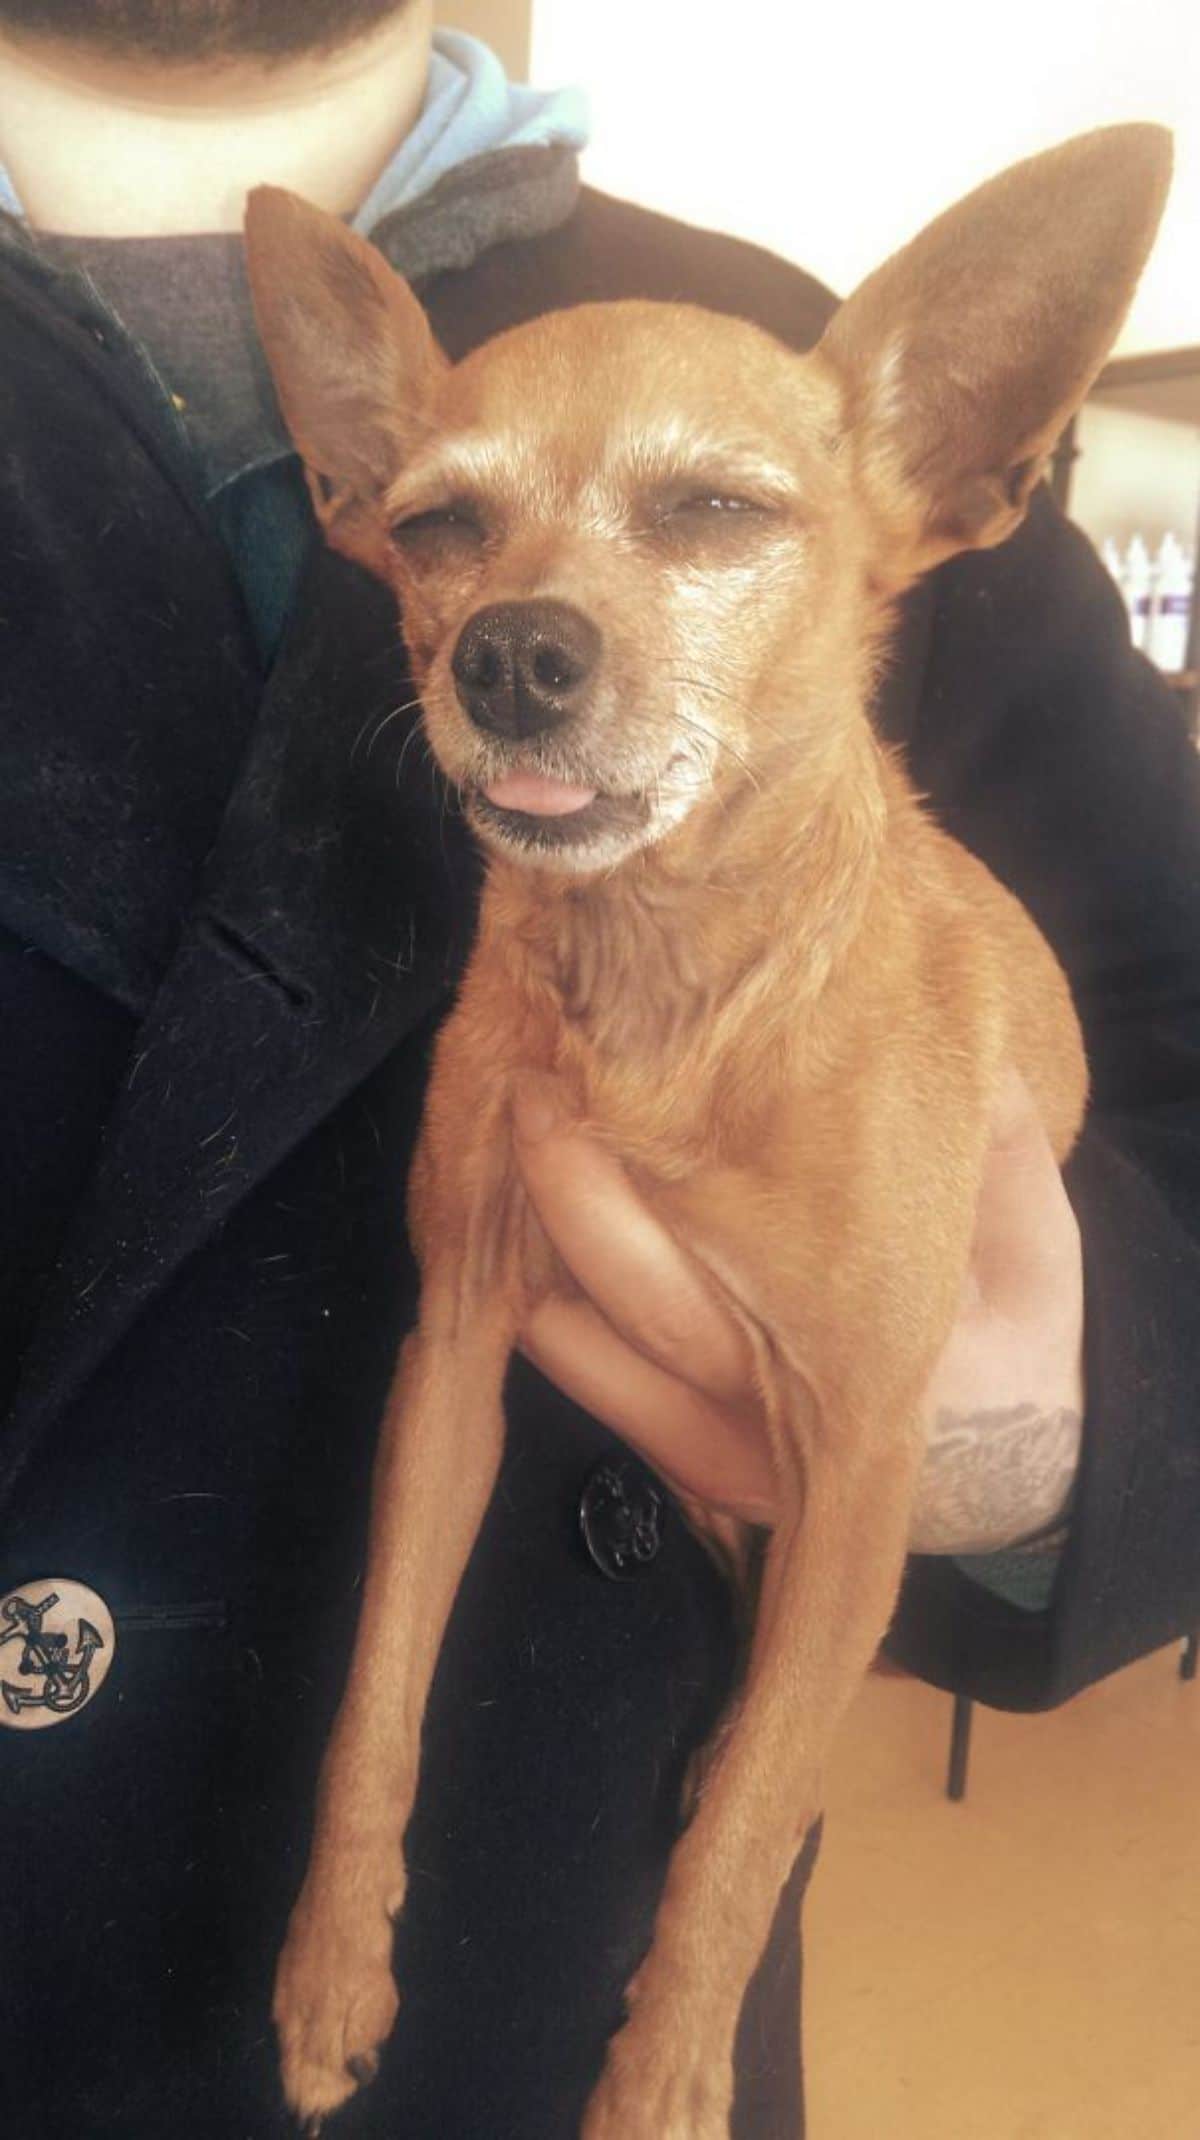 brown chihuahua with eyes narrowed and tongue sticking out slightly being held by someone